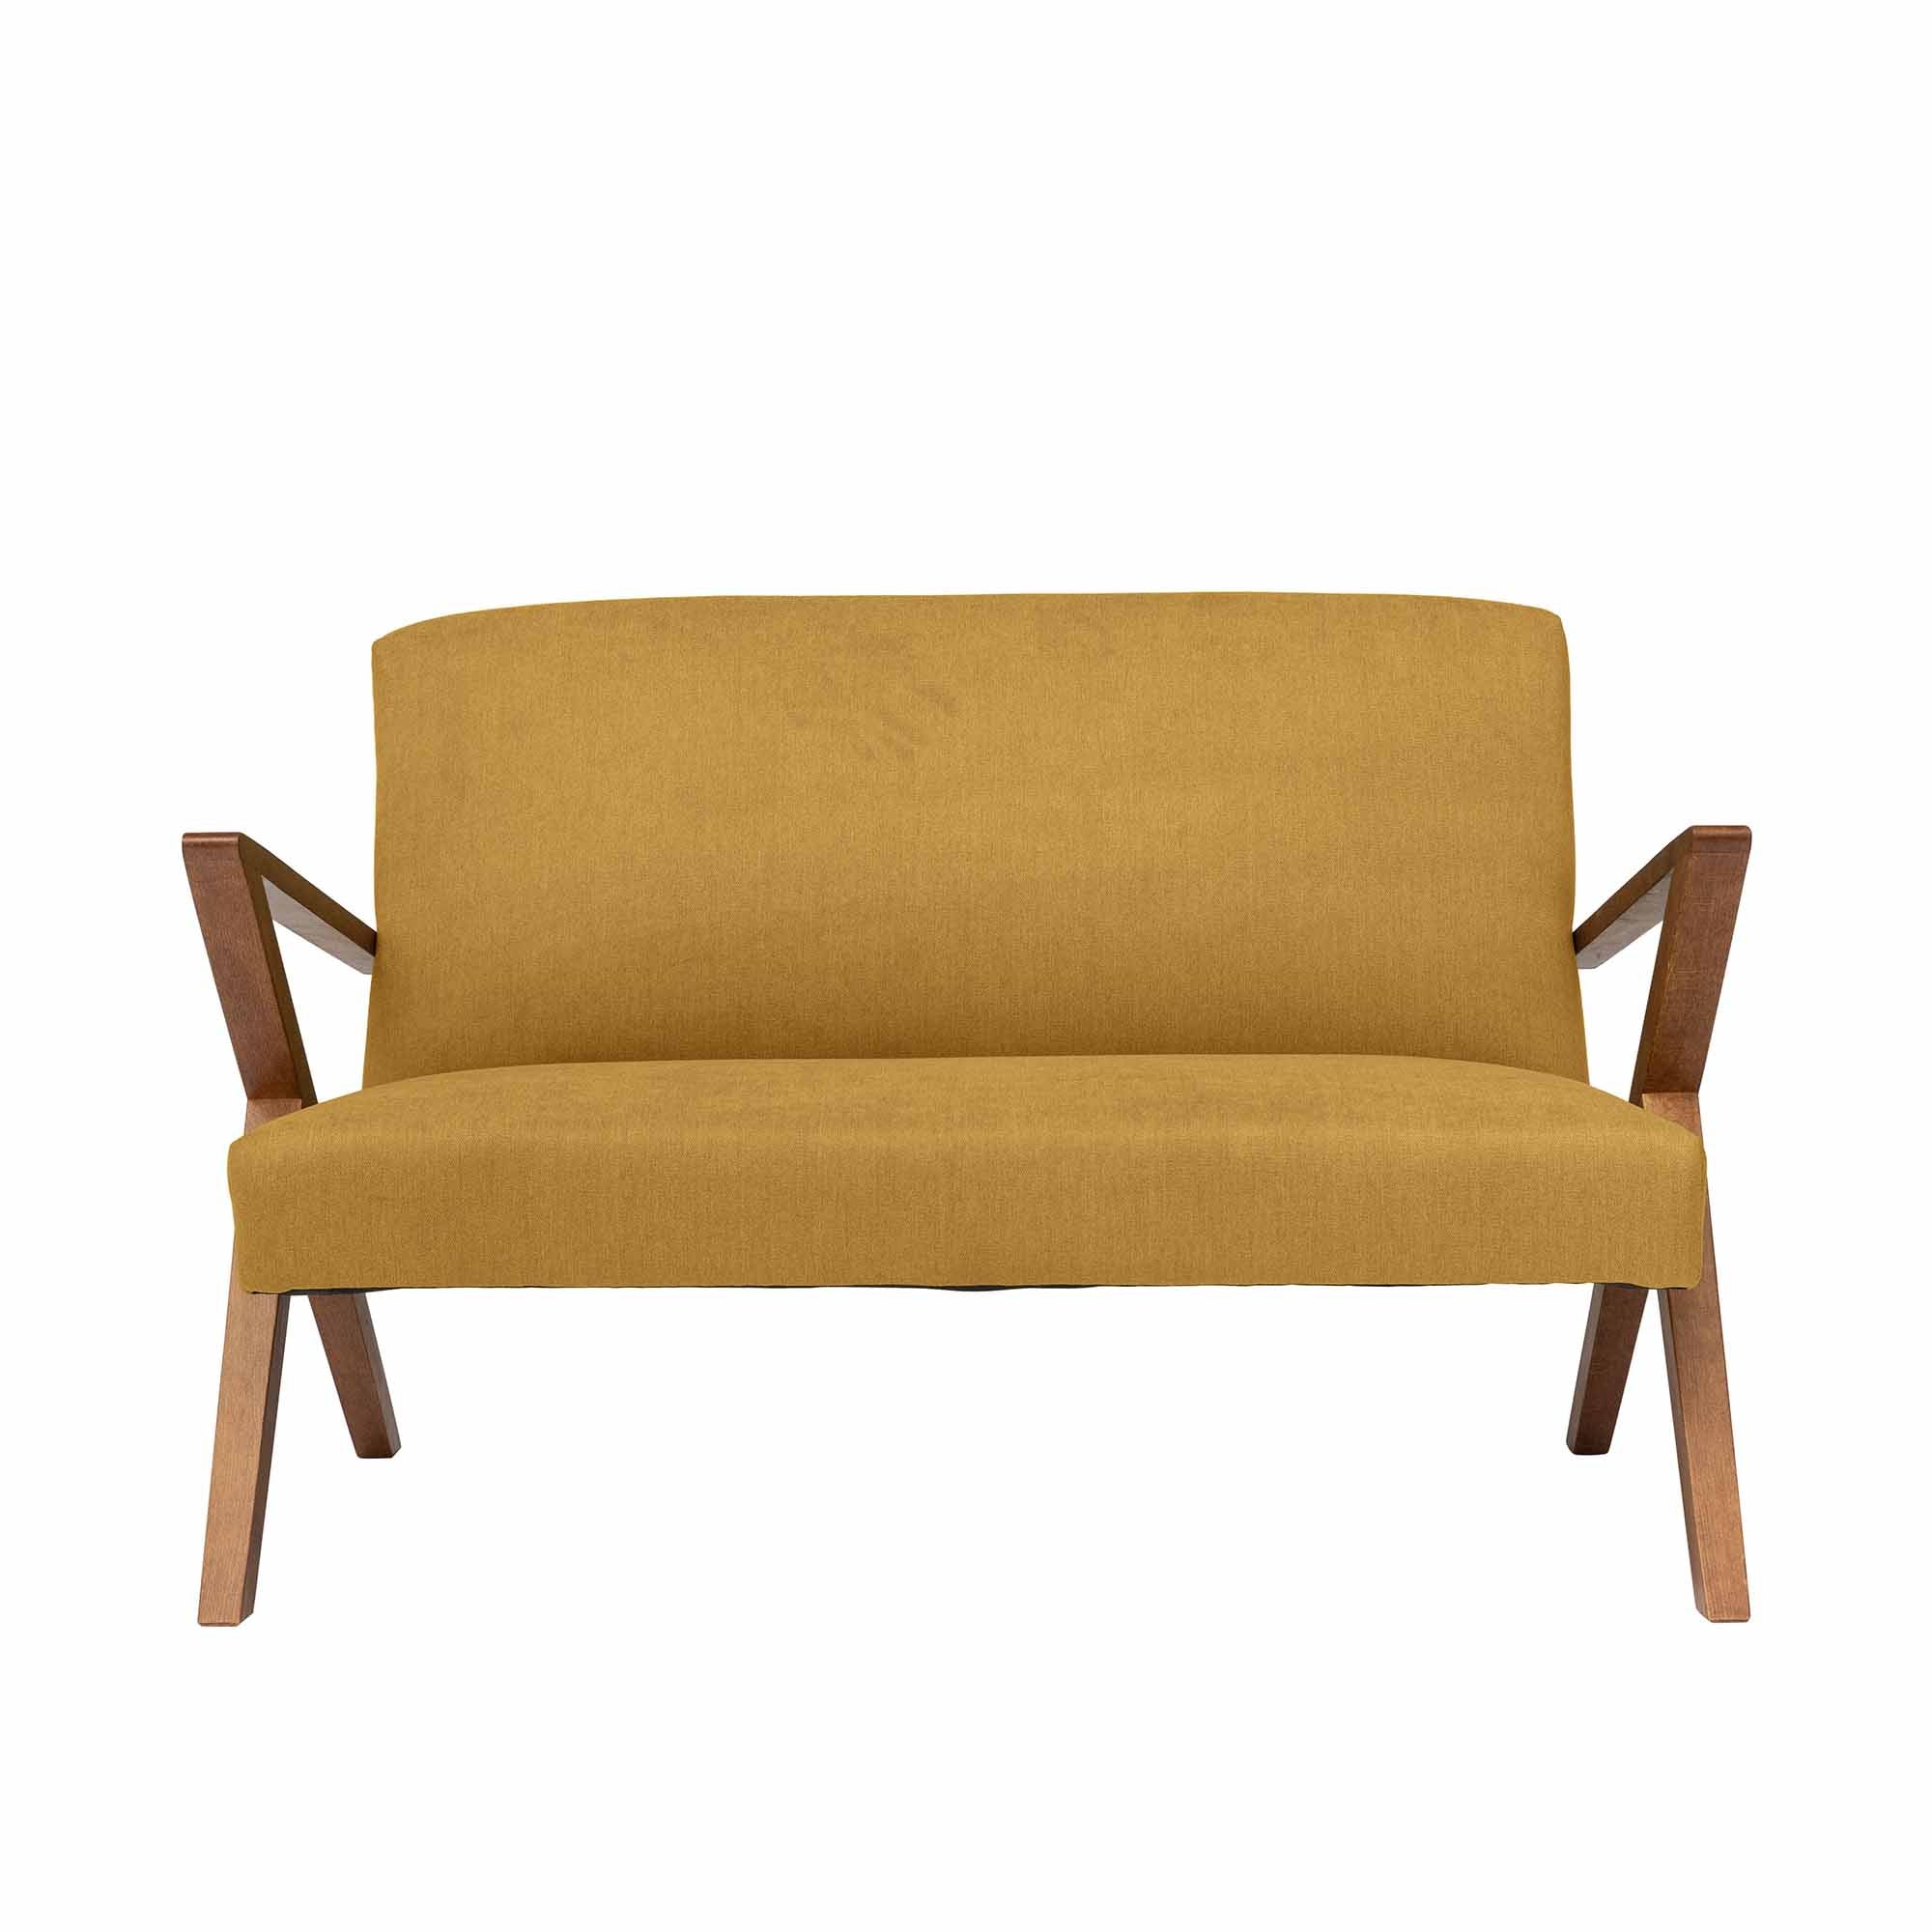  2-Seater Sofa, Beech Wood Frame, Walnut Colour yellow fabric, front view